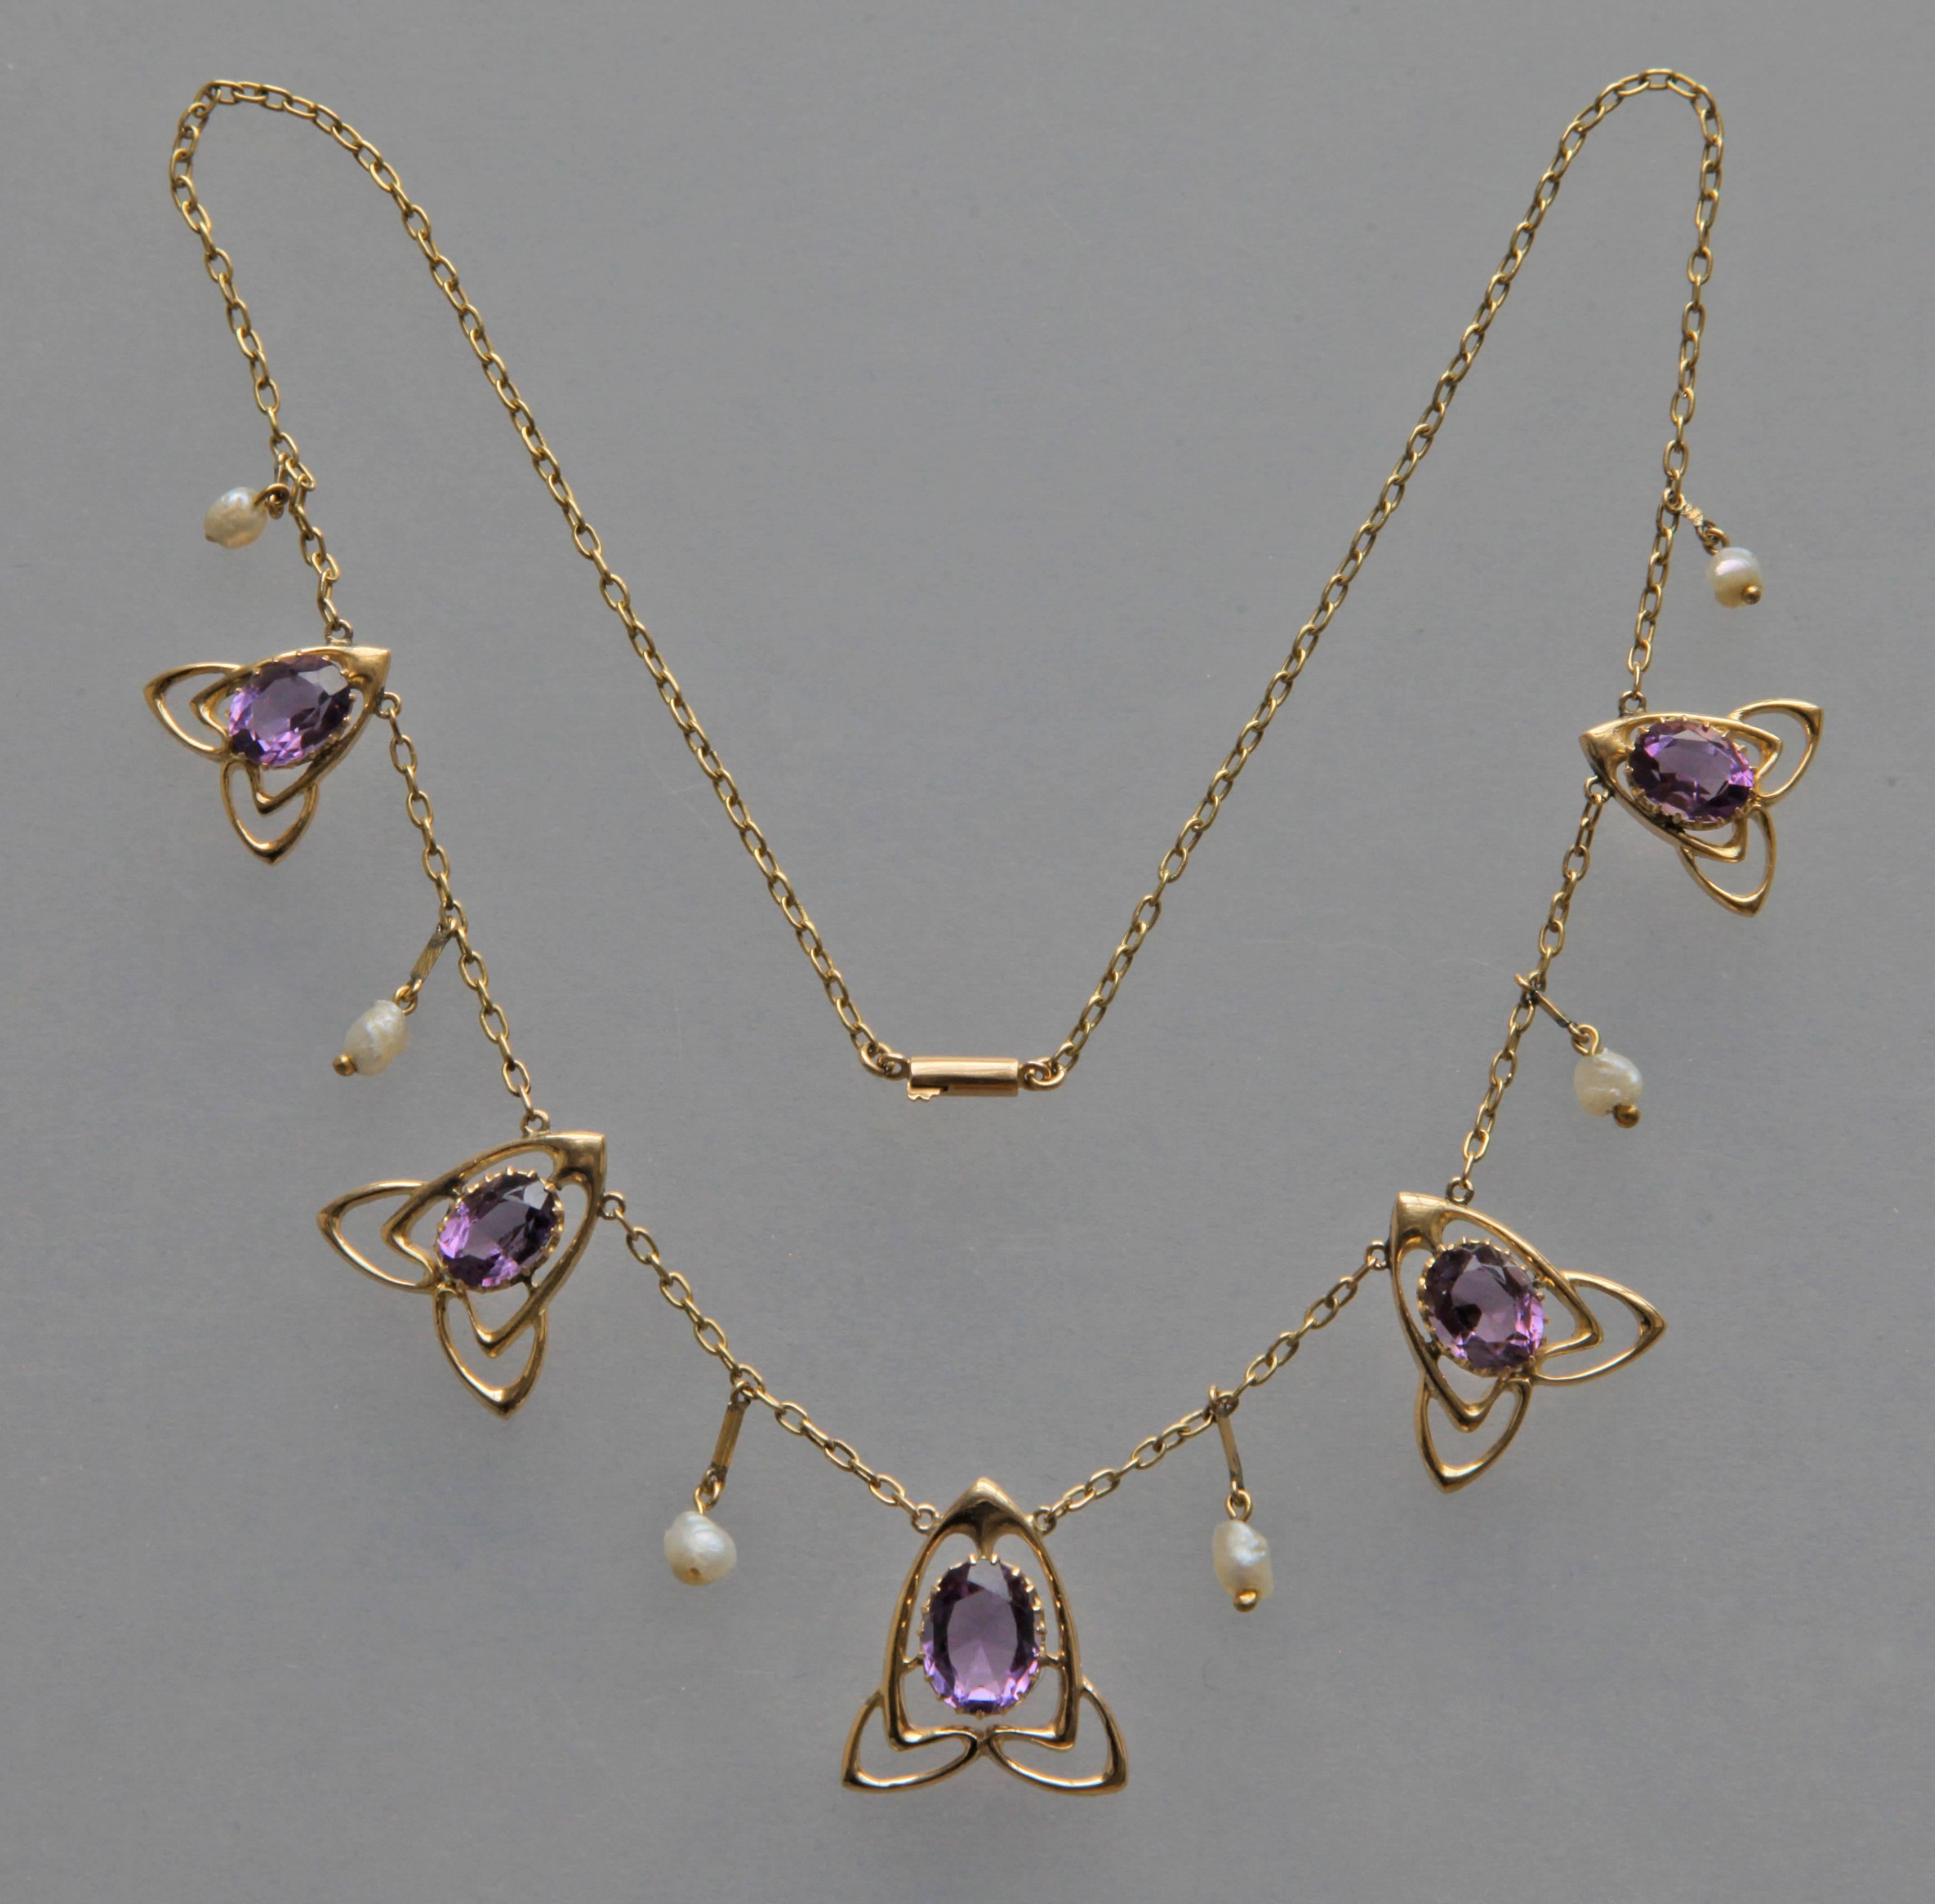 Women's Archibald Knox Liberty & Co Amethyst Gold Necklace